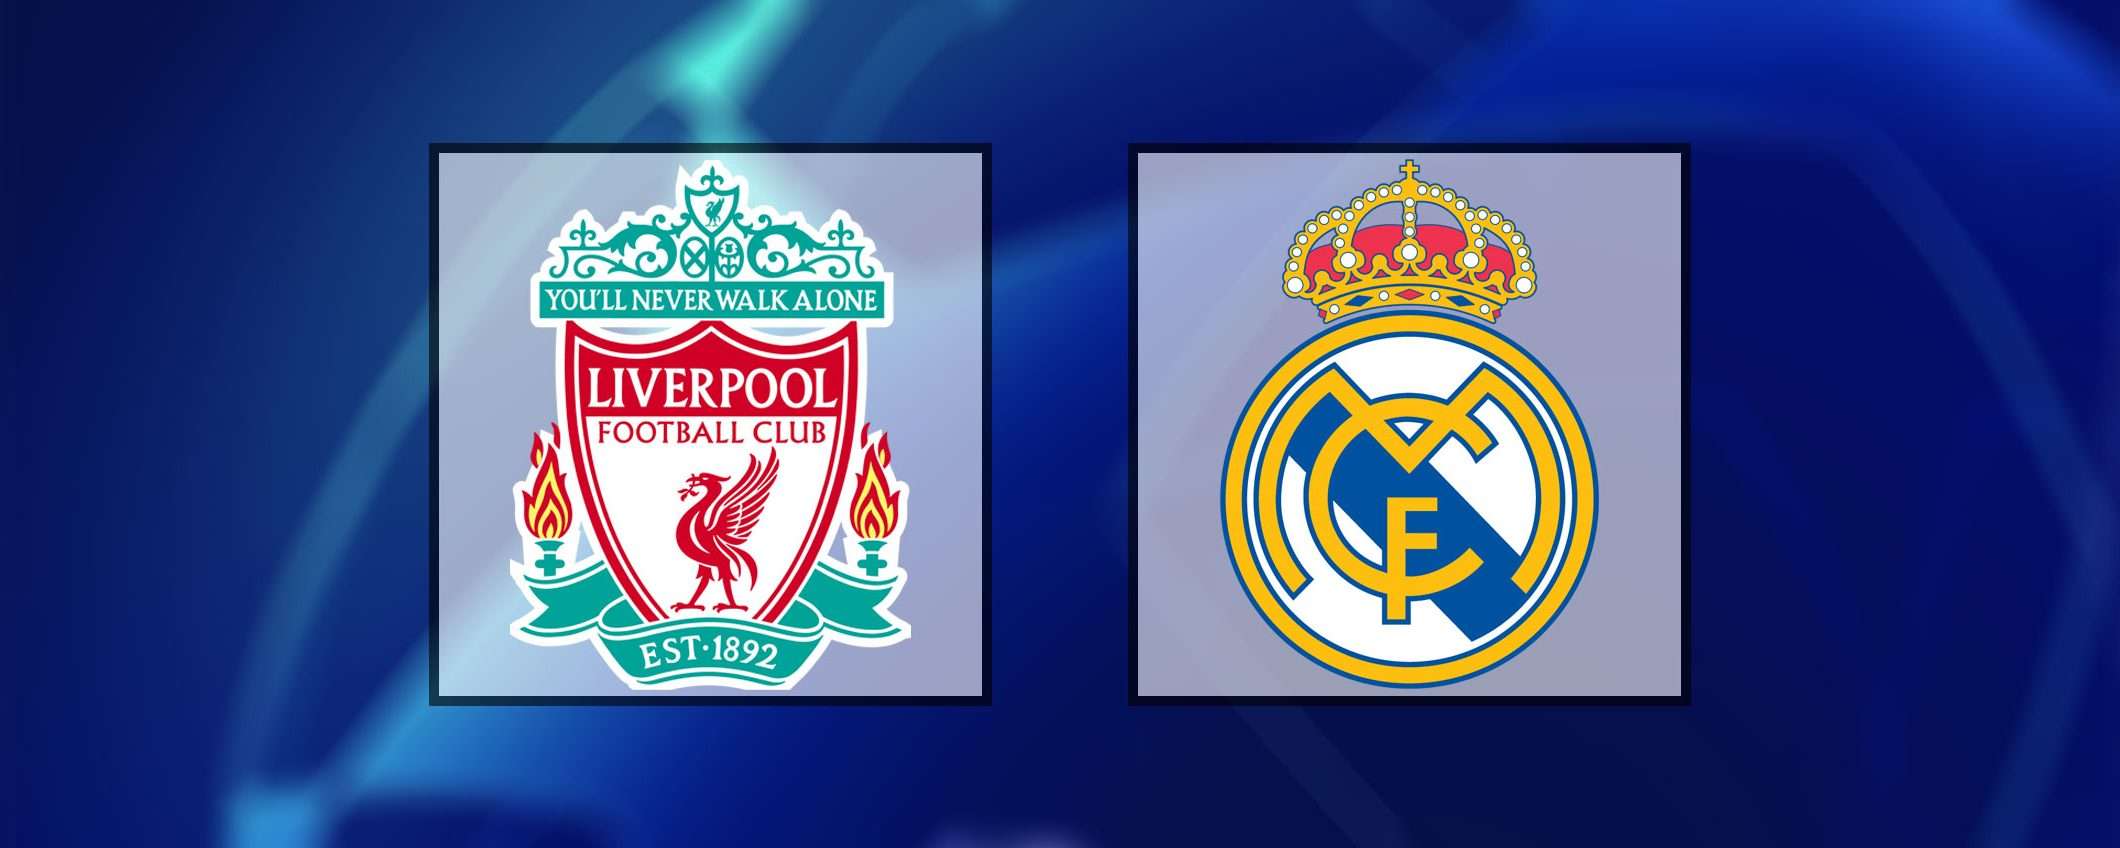 Come vedere Liverpool-Real Madrid in streaming